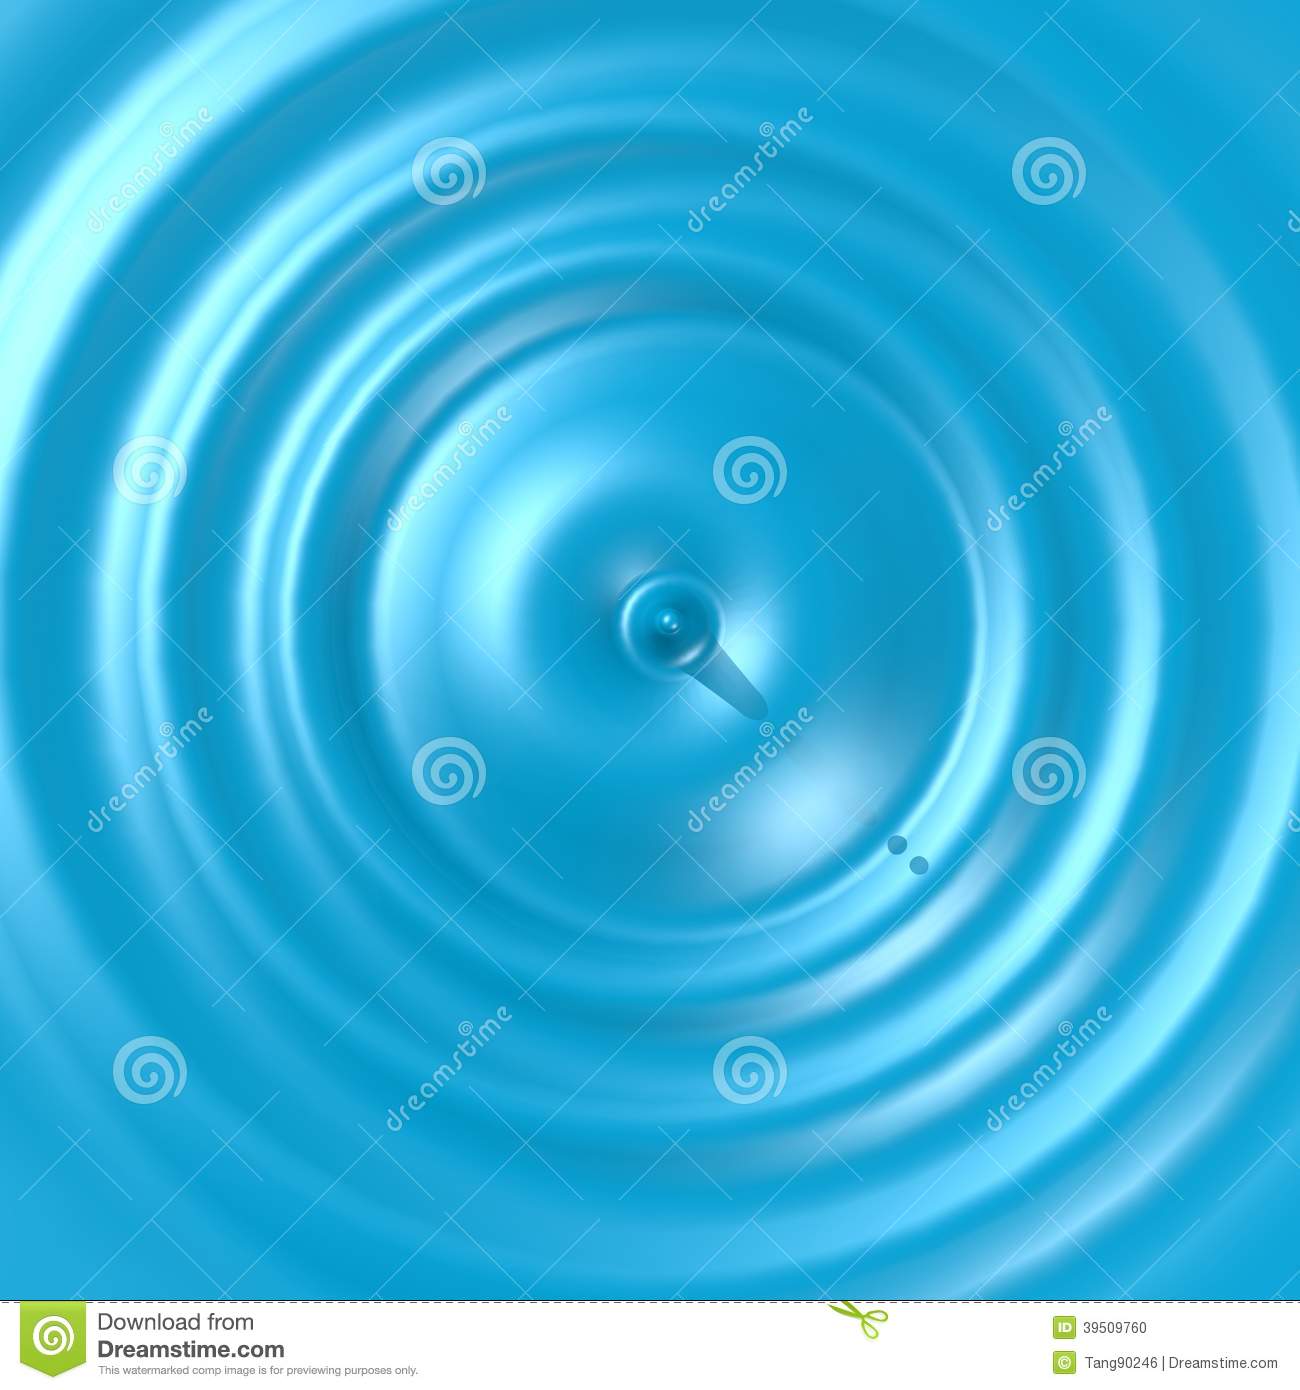 Water Ripples Graphic Design